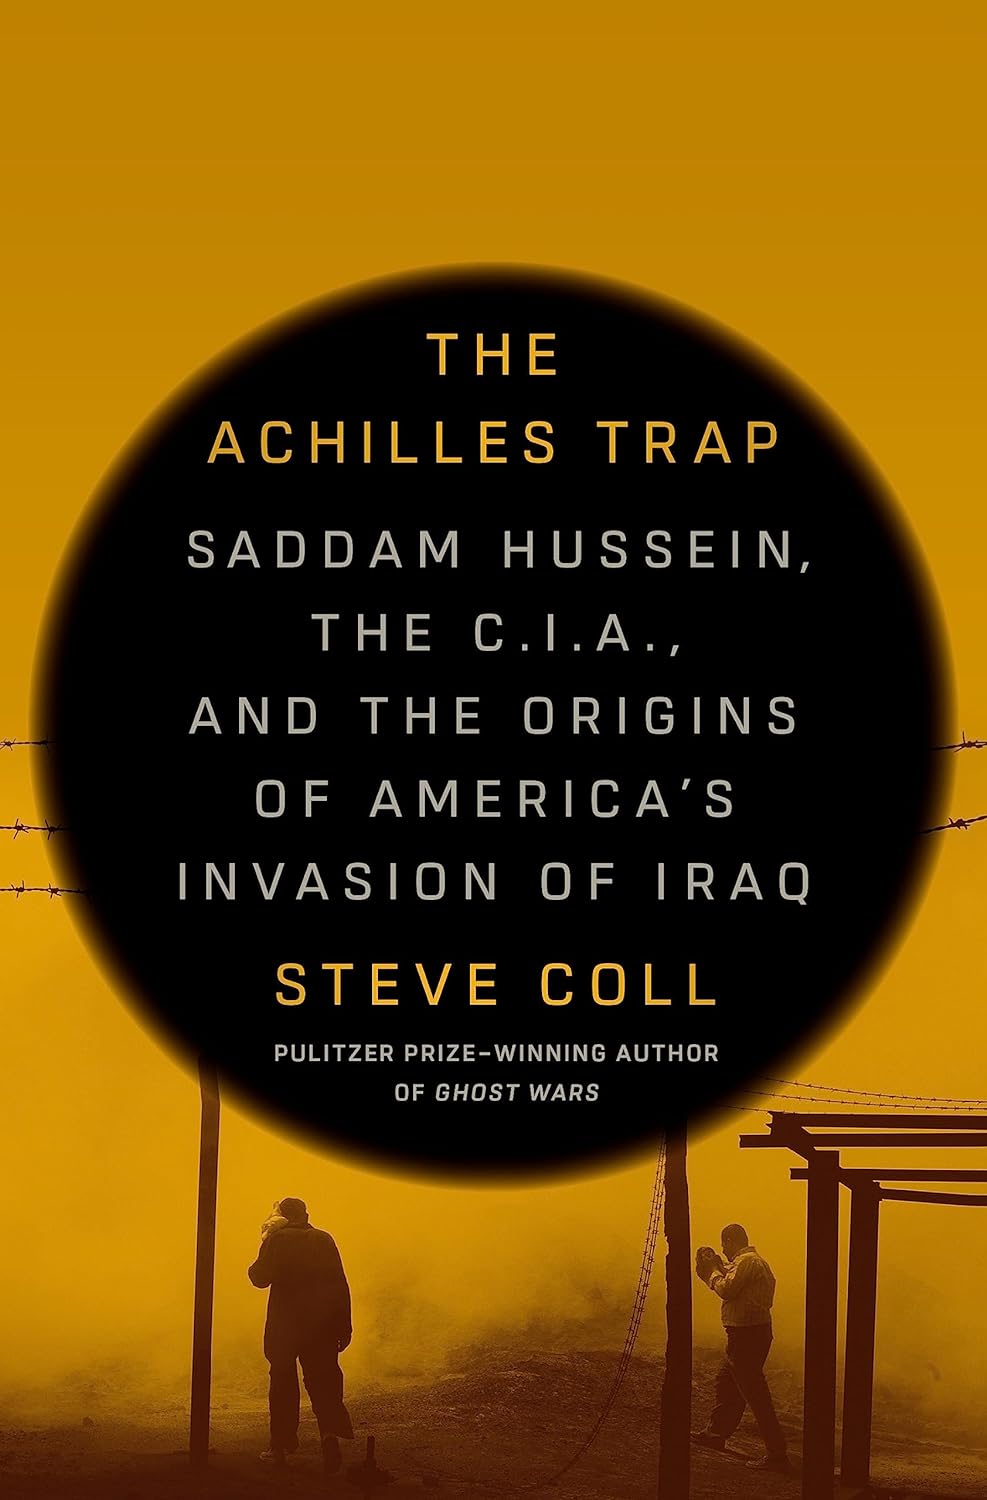 The Achilles Trap by Steve Coll